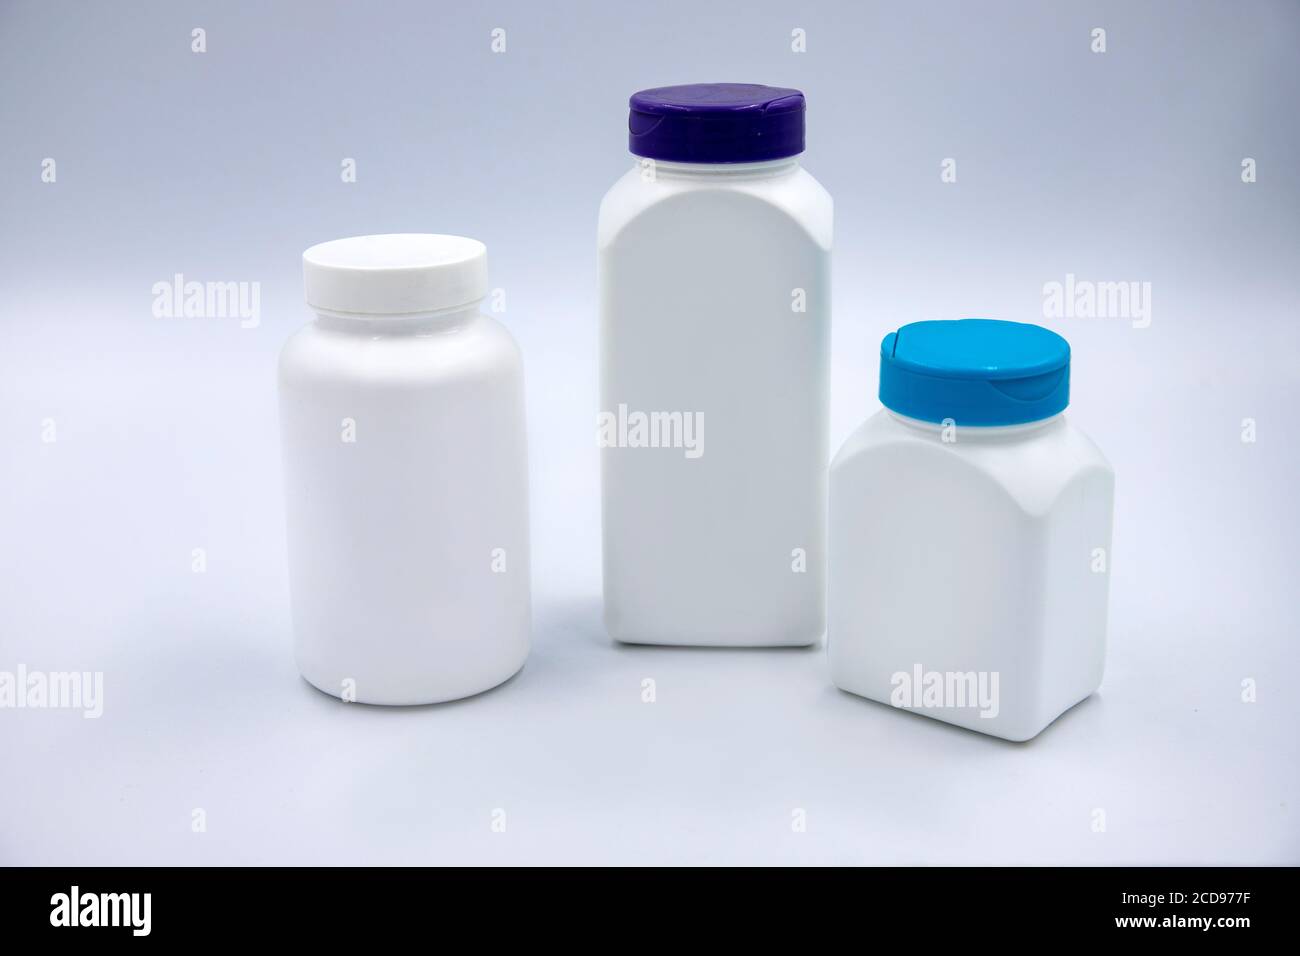 White plastic bottles for pills or vitamins on white background. Round and square pharmacologic container mockup. Pill or drug jar blank package desig Stock Photo